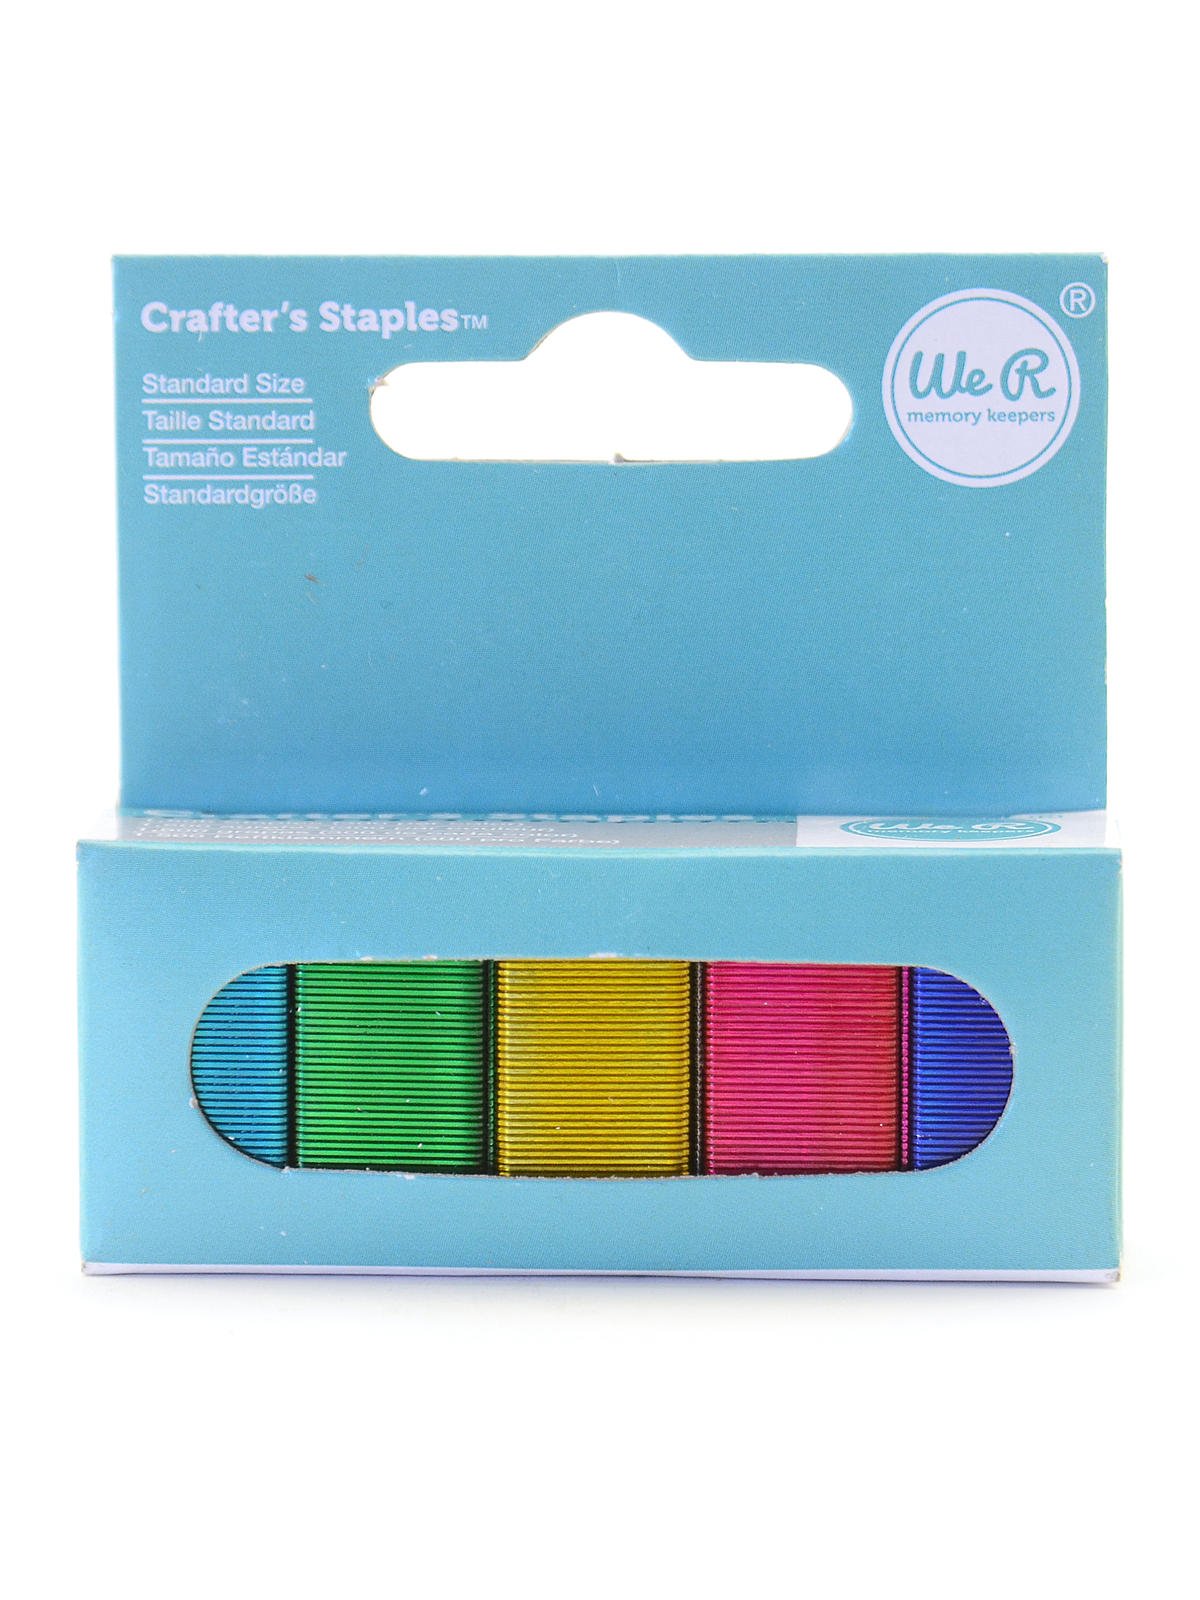 Crafter's Stapler W/1,500 Staples by We R Memory Keepers 